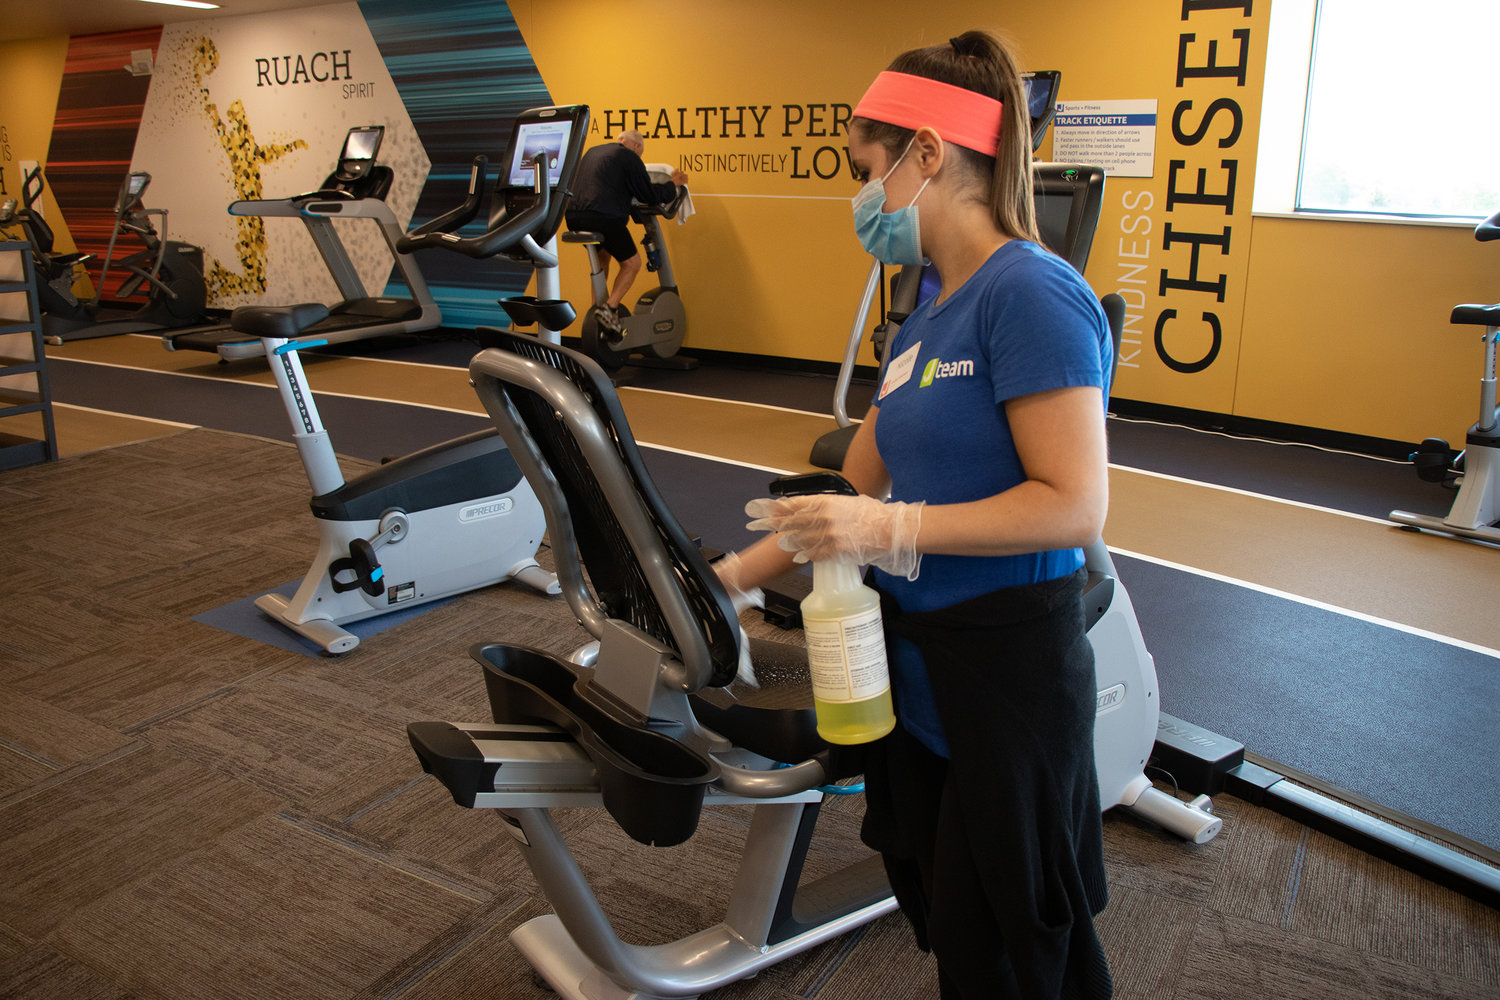 At the JCC in Overland Park, Kansas, gym equipment is cleaned between uses to limit the possibility of coronavirus infection.